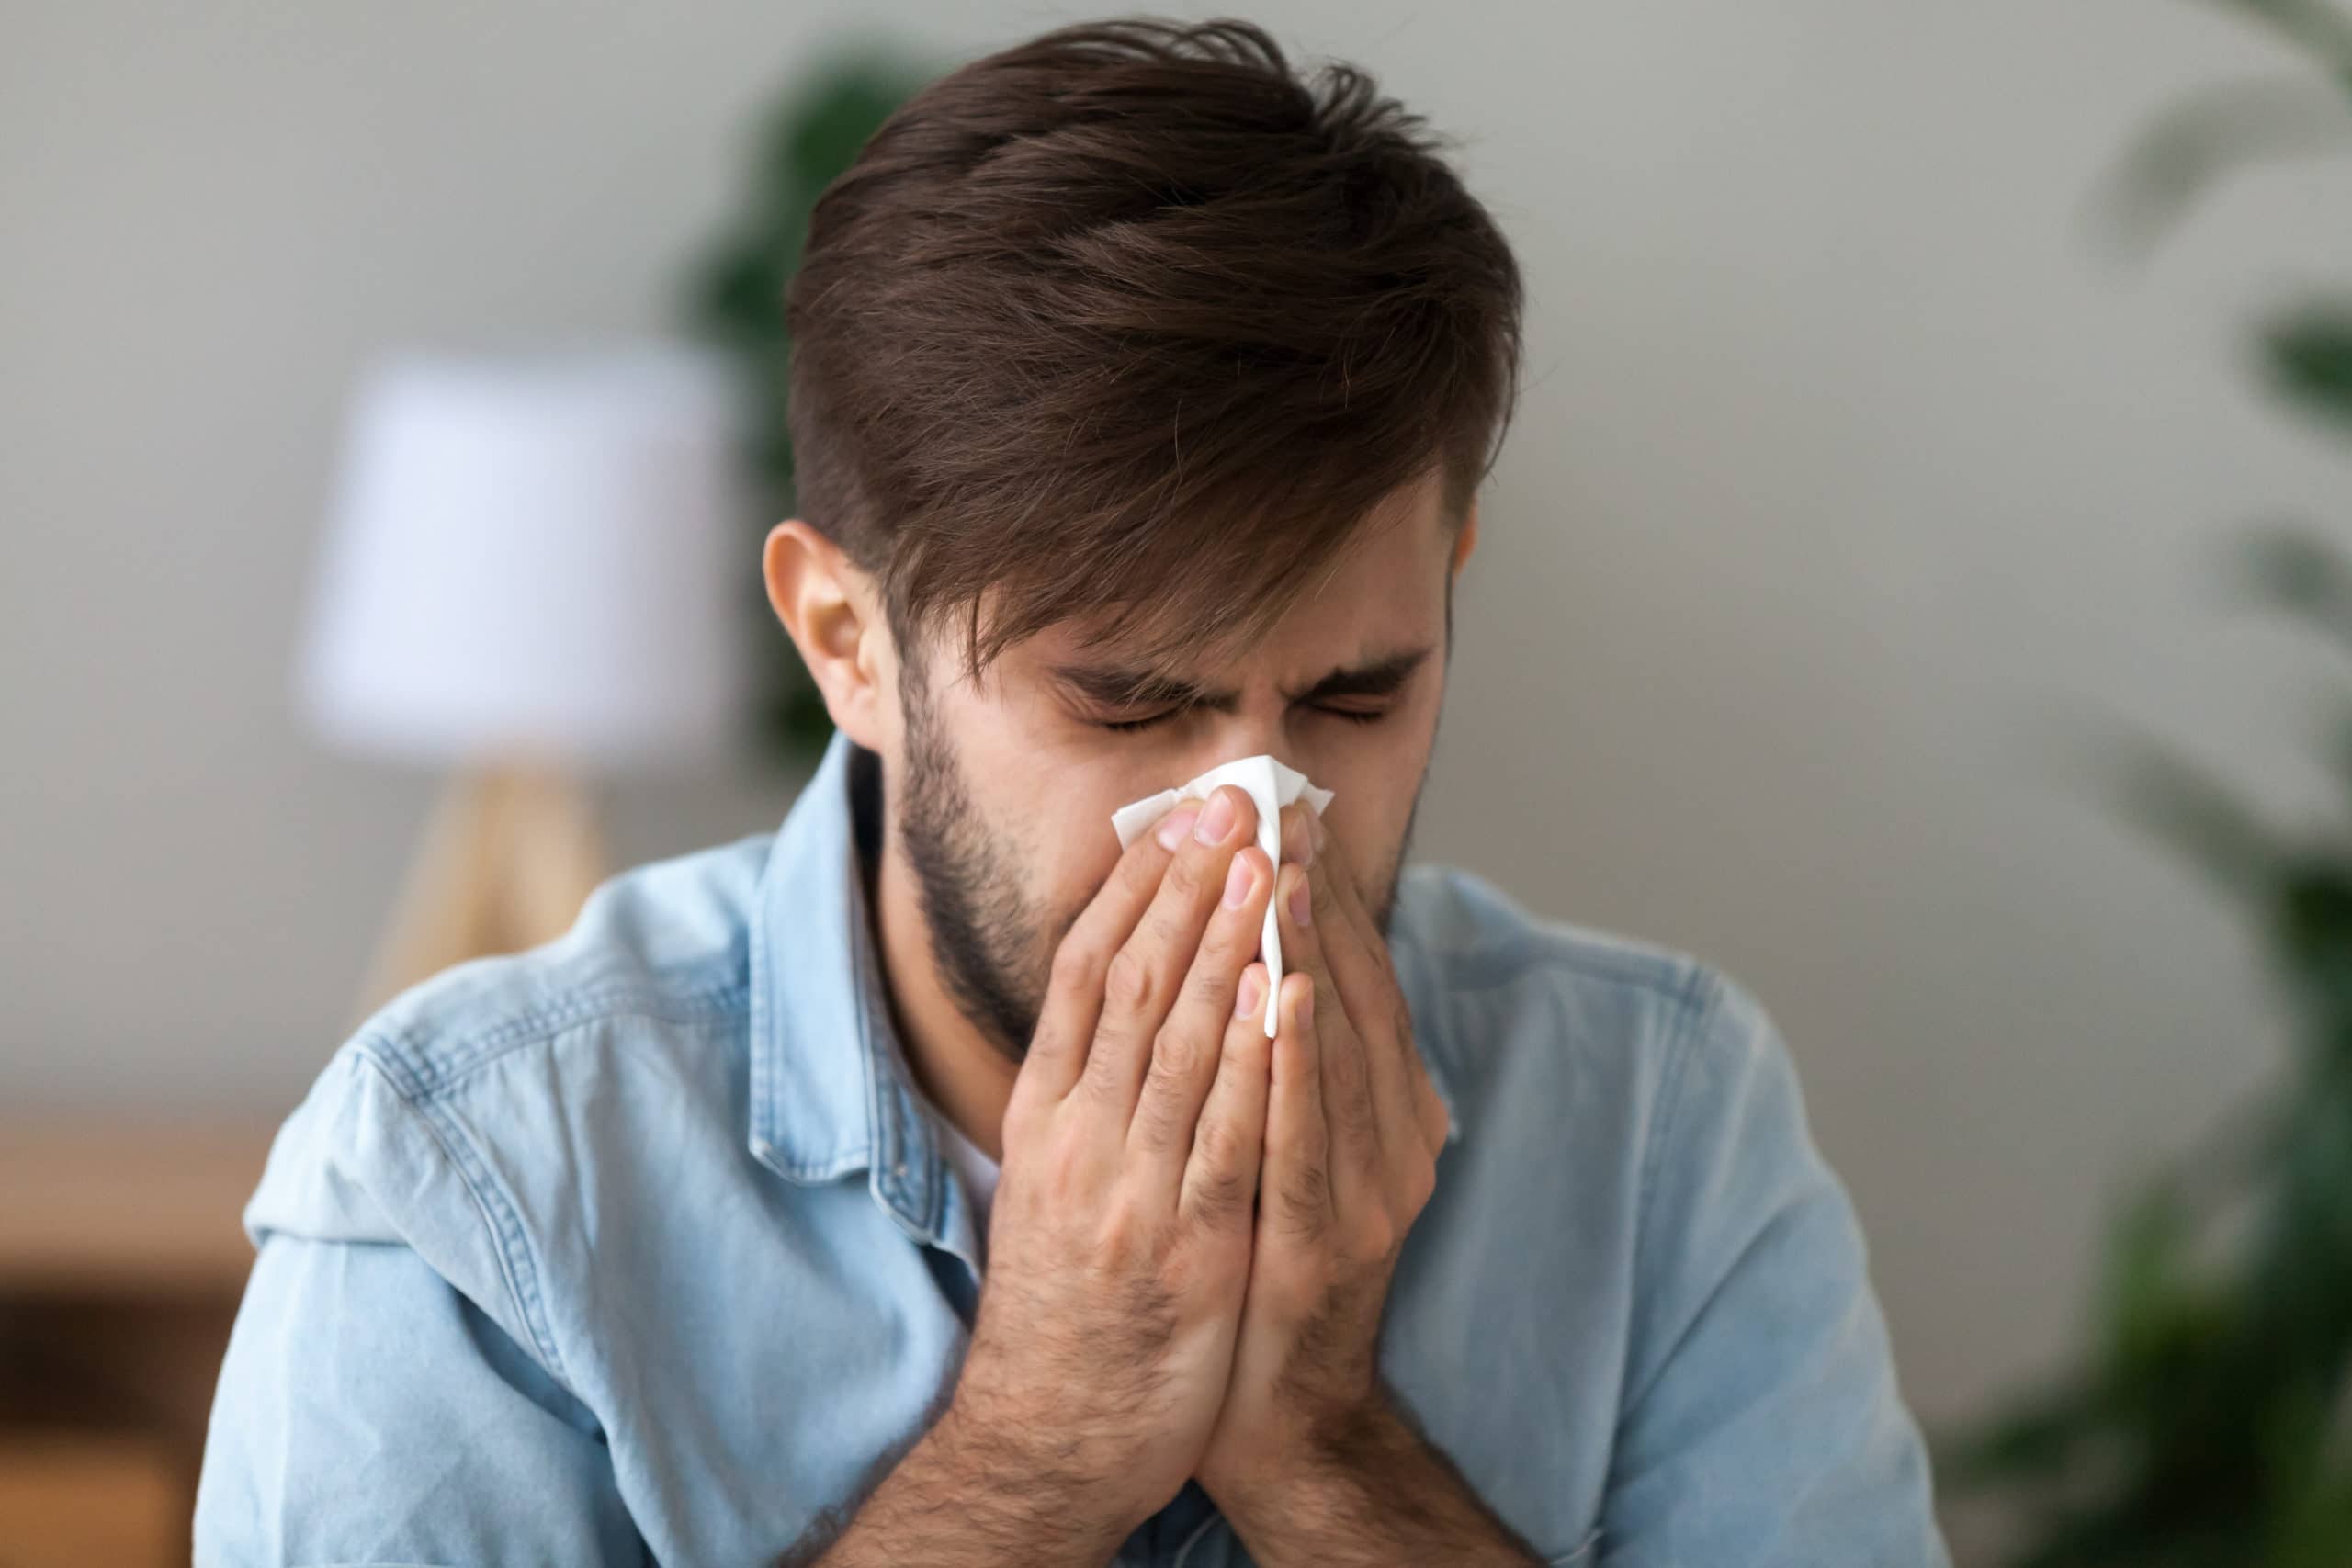 man with a compromised immune system sneezing because he probably has coronavirus